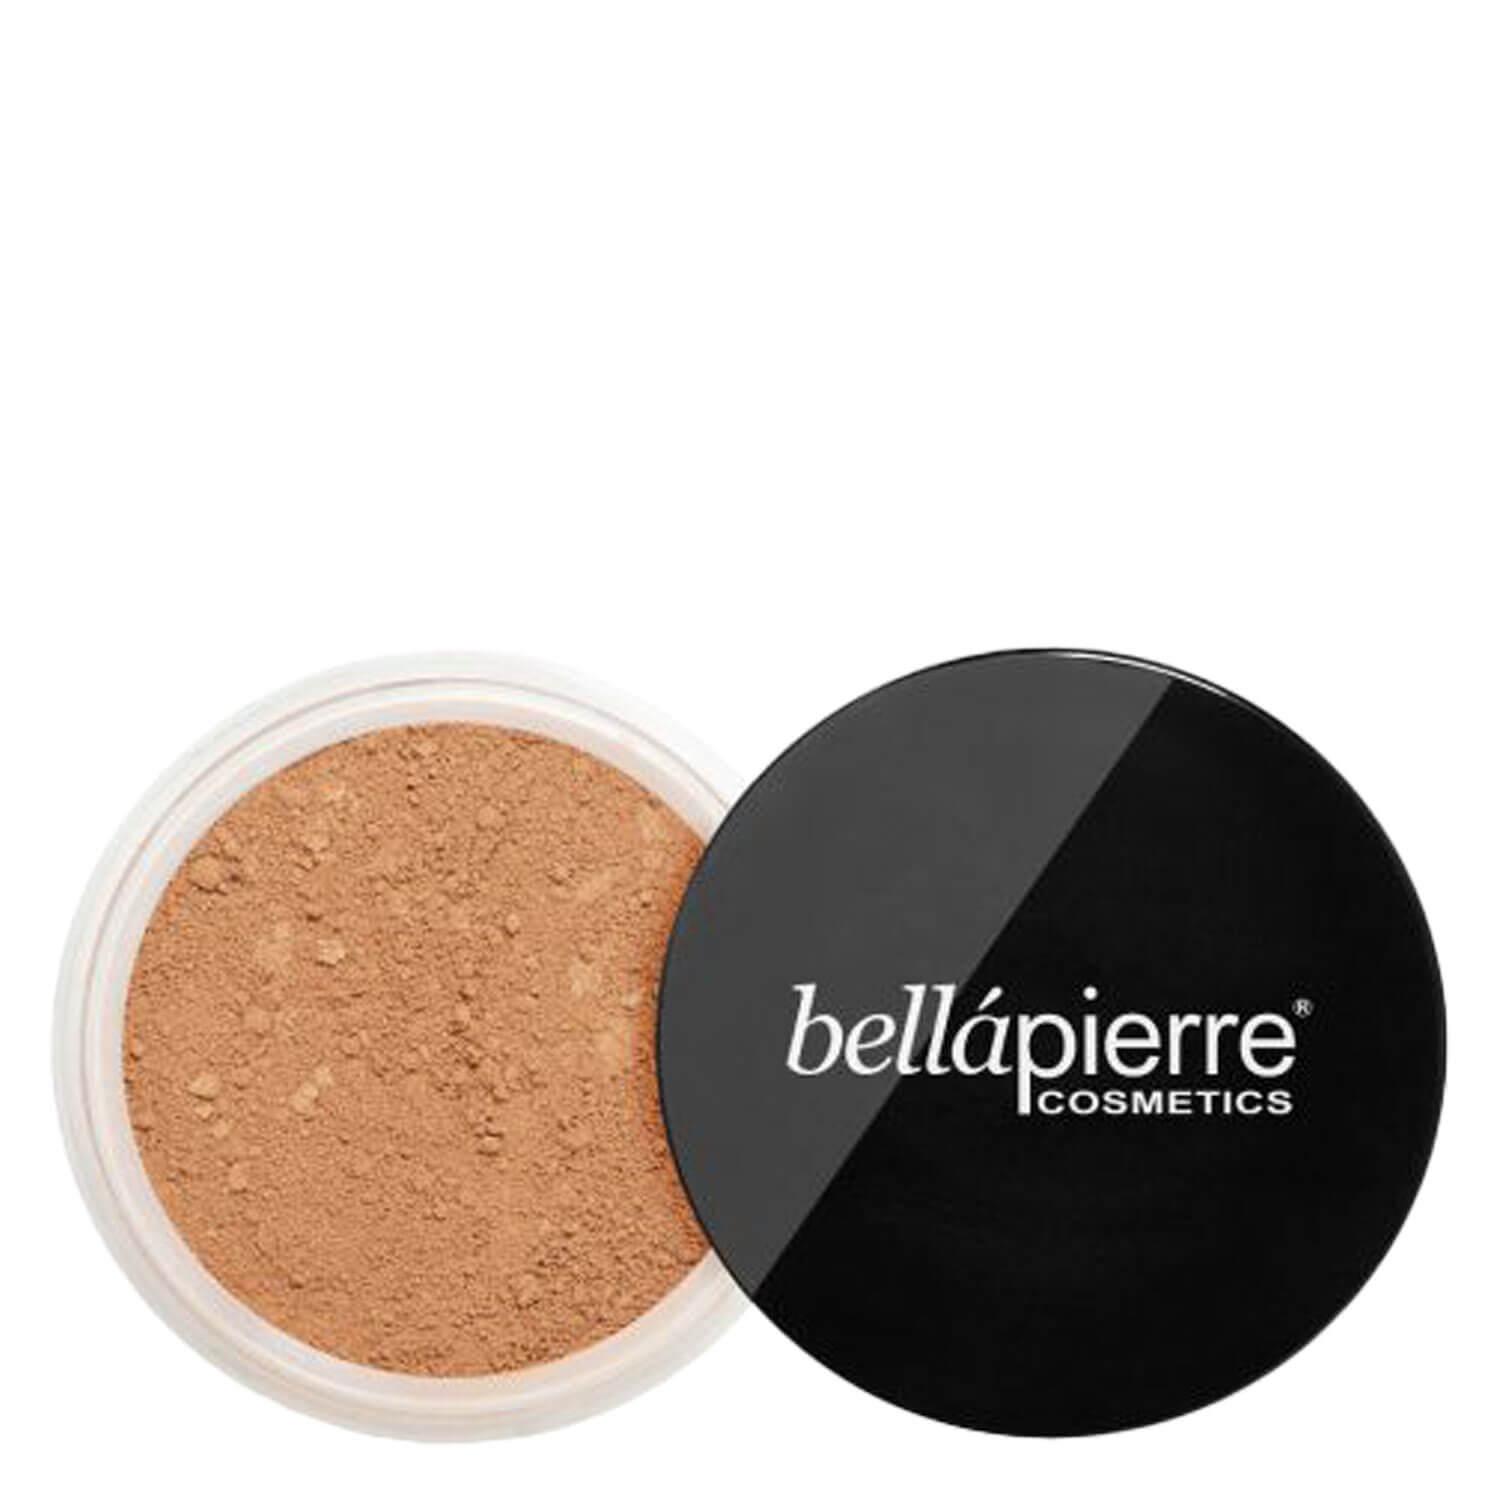 bellapierre Teint - Loose Mineral Foundation SPF15 Cafe